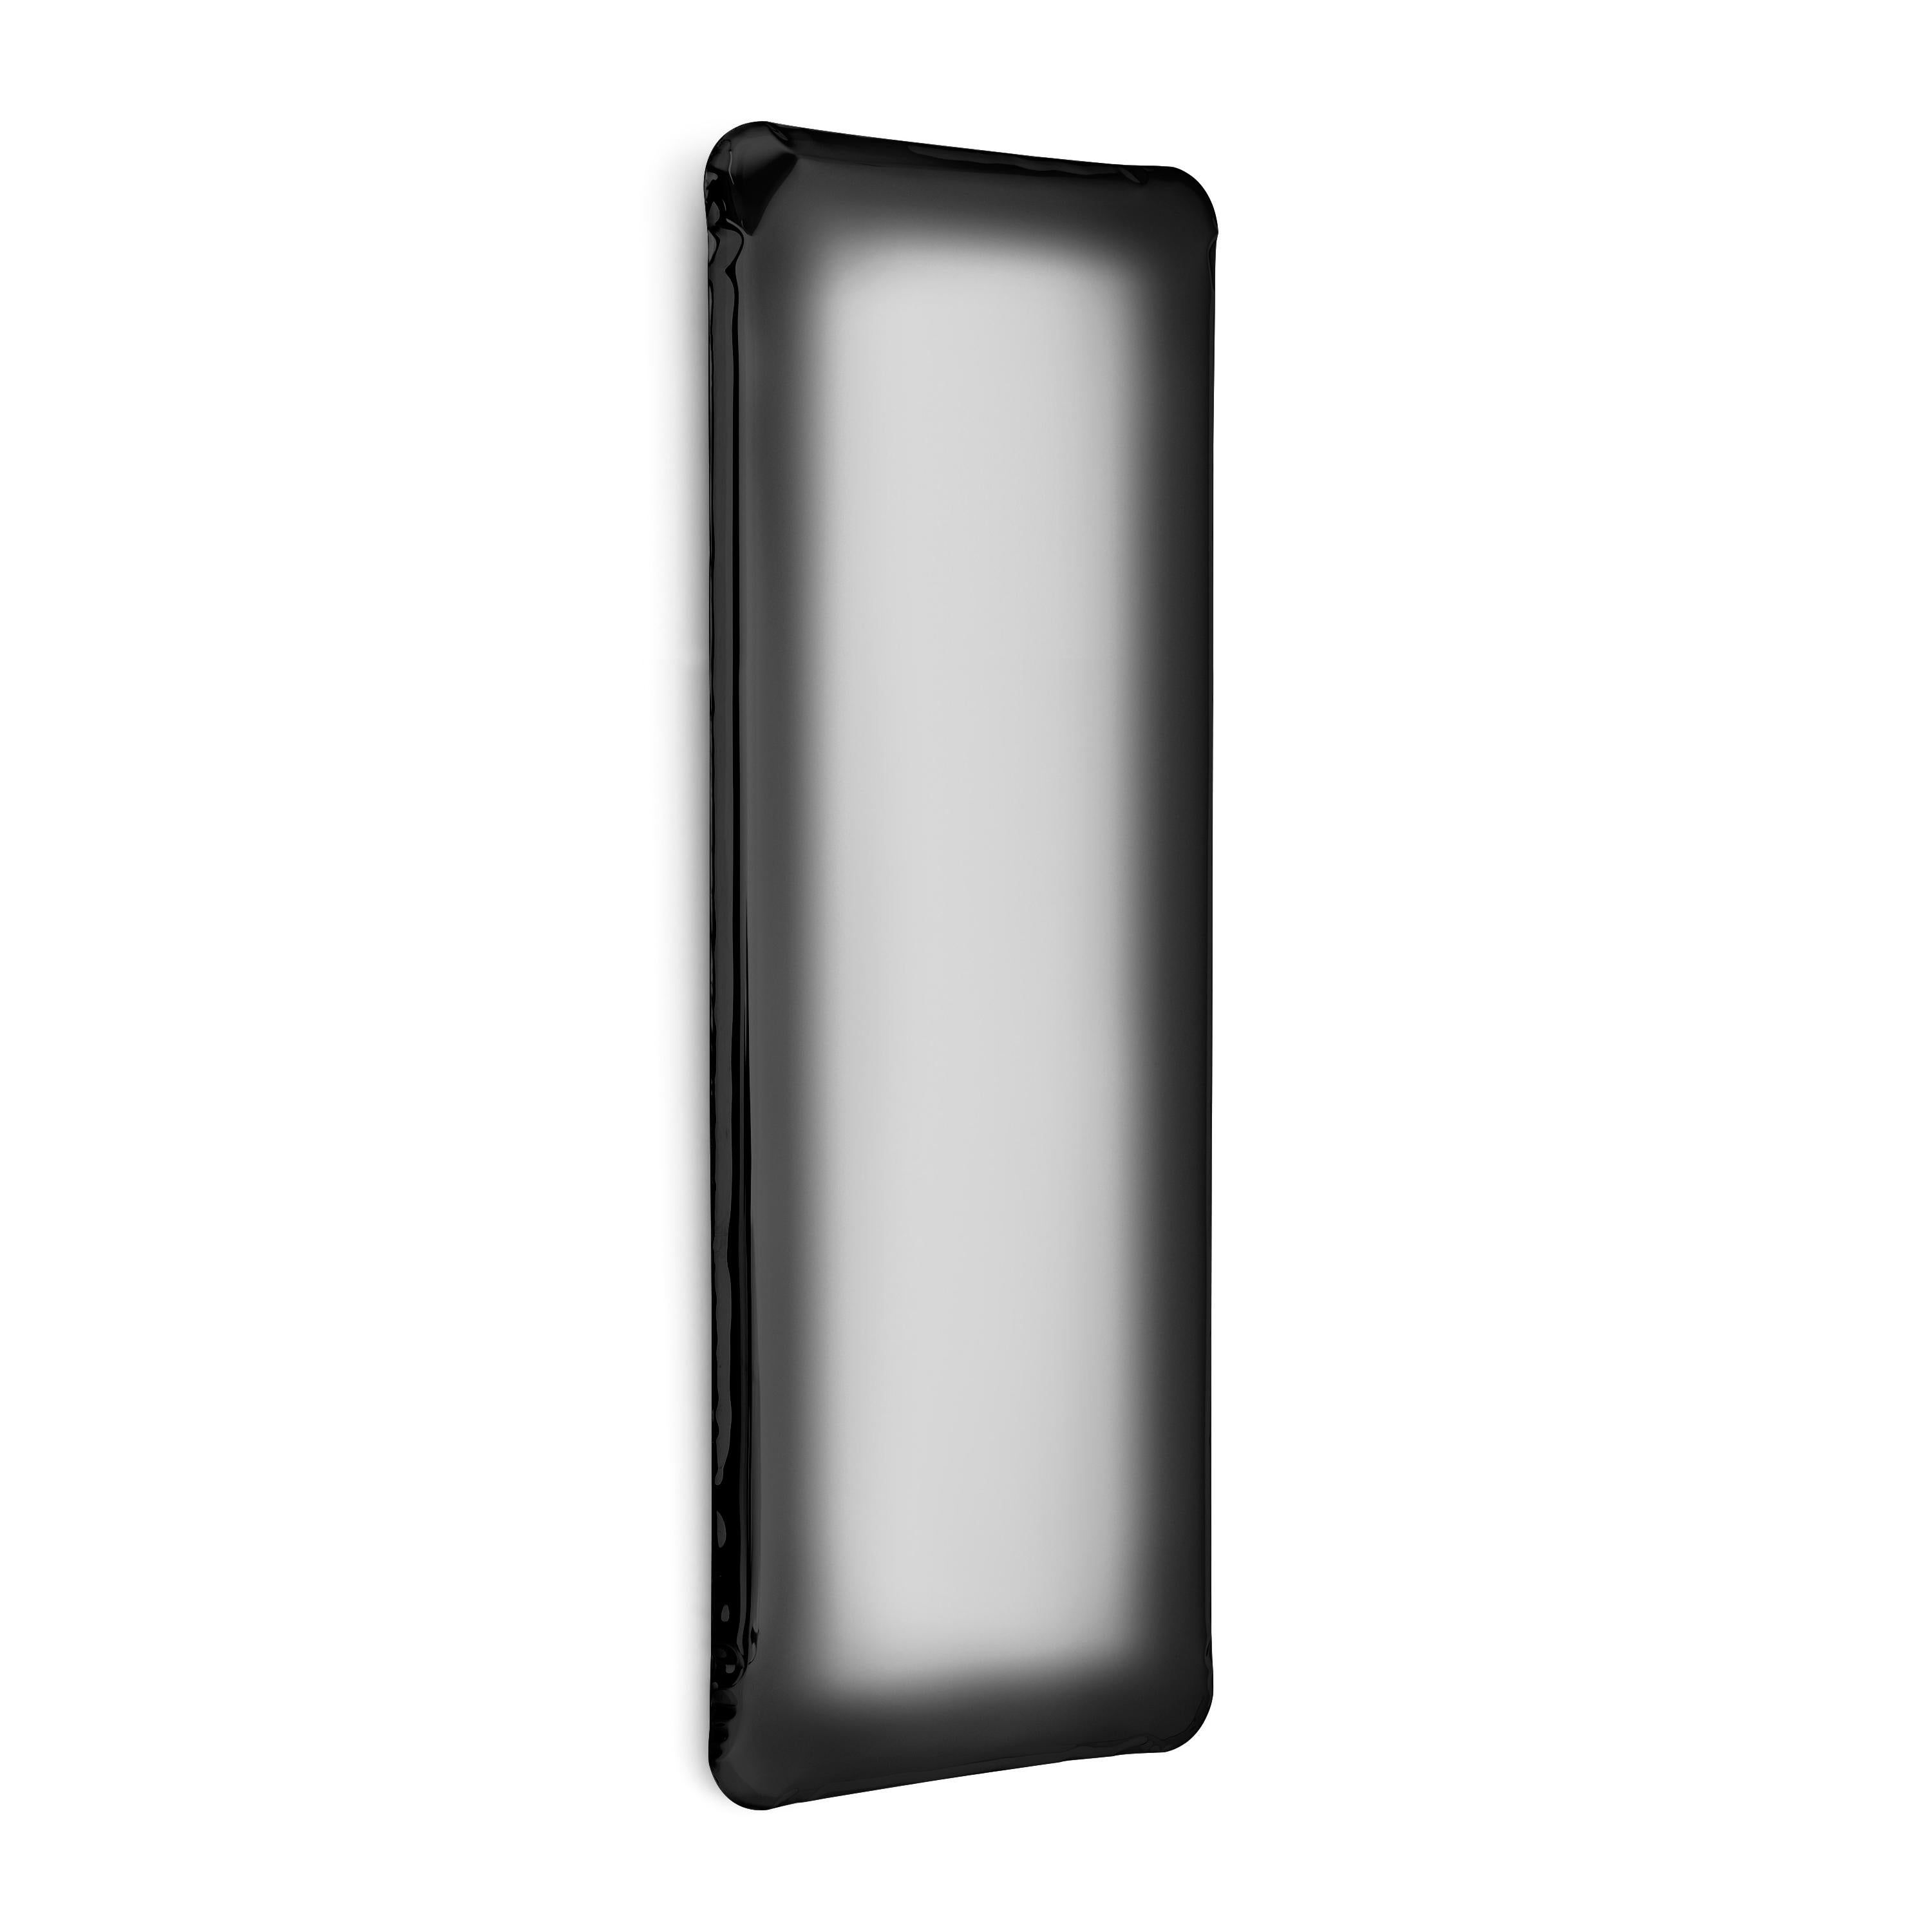 Polished Contemporary Mirror 'Tafla Q2' by Zieta, Transitions, Red Rubin For Sale